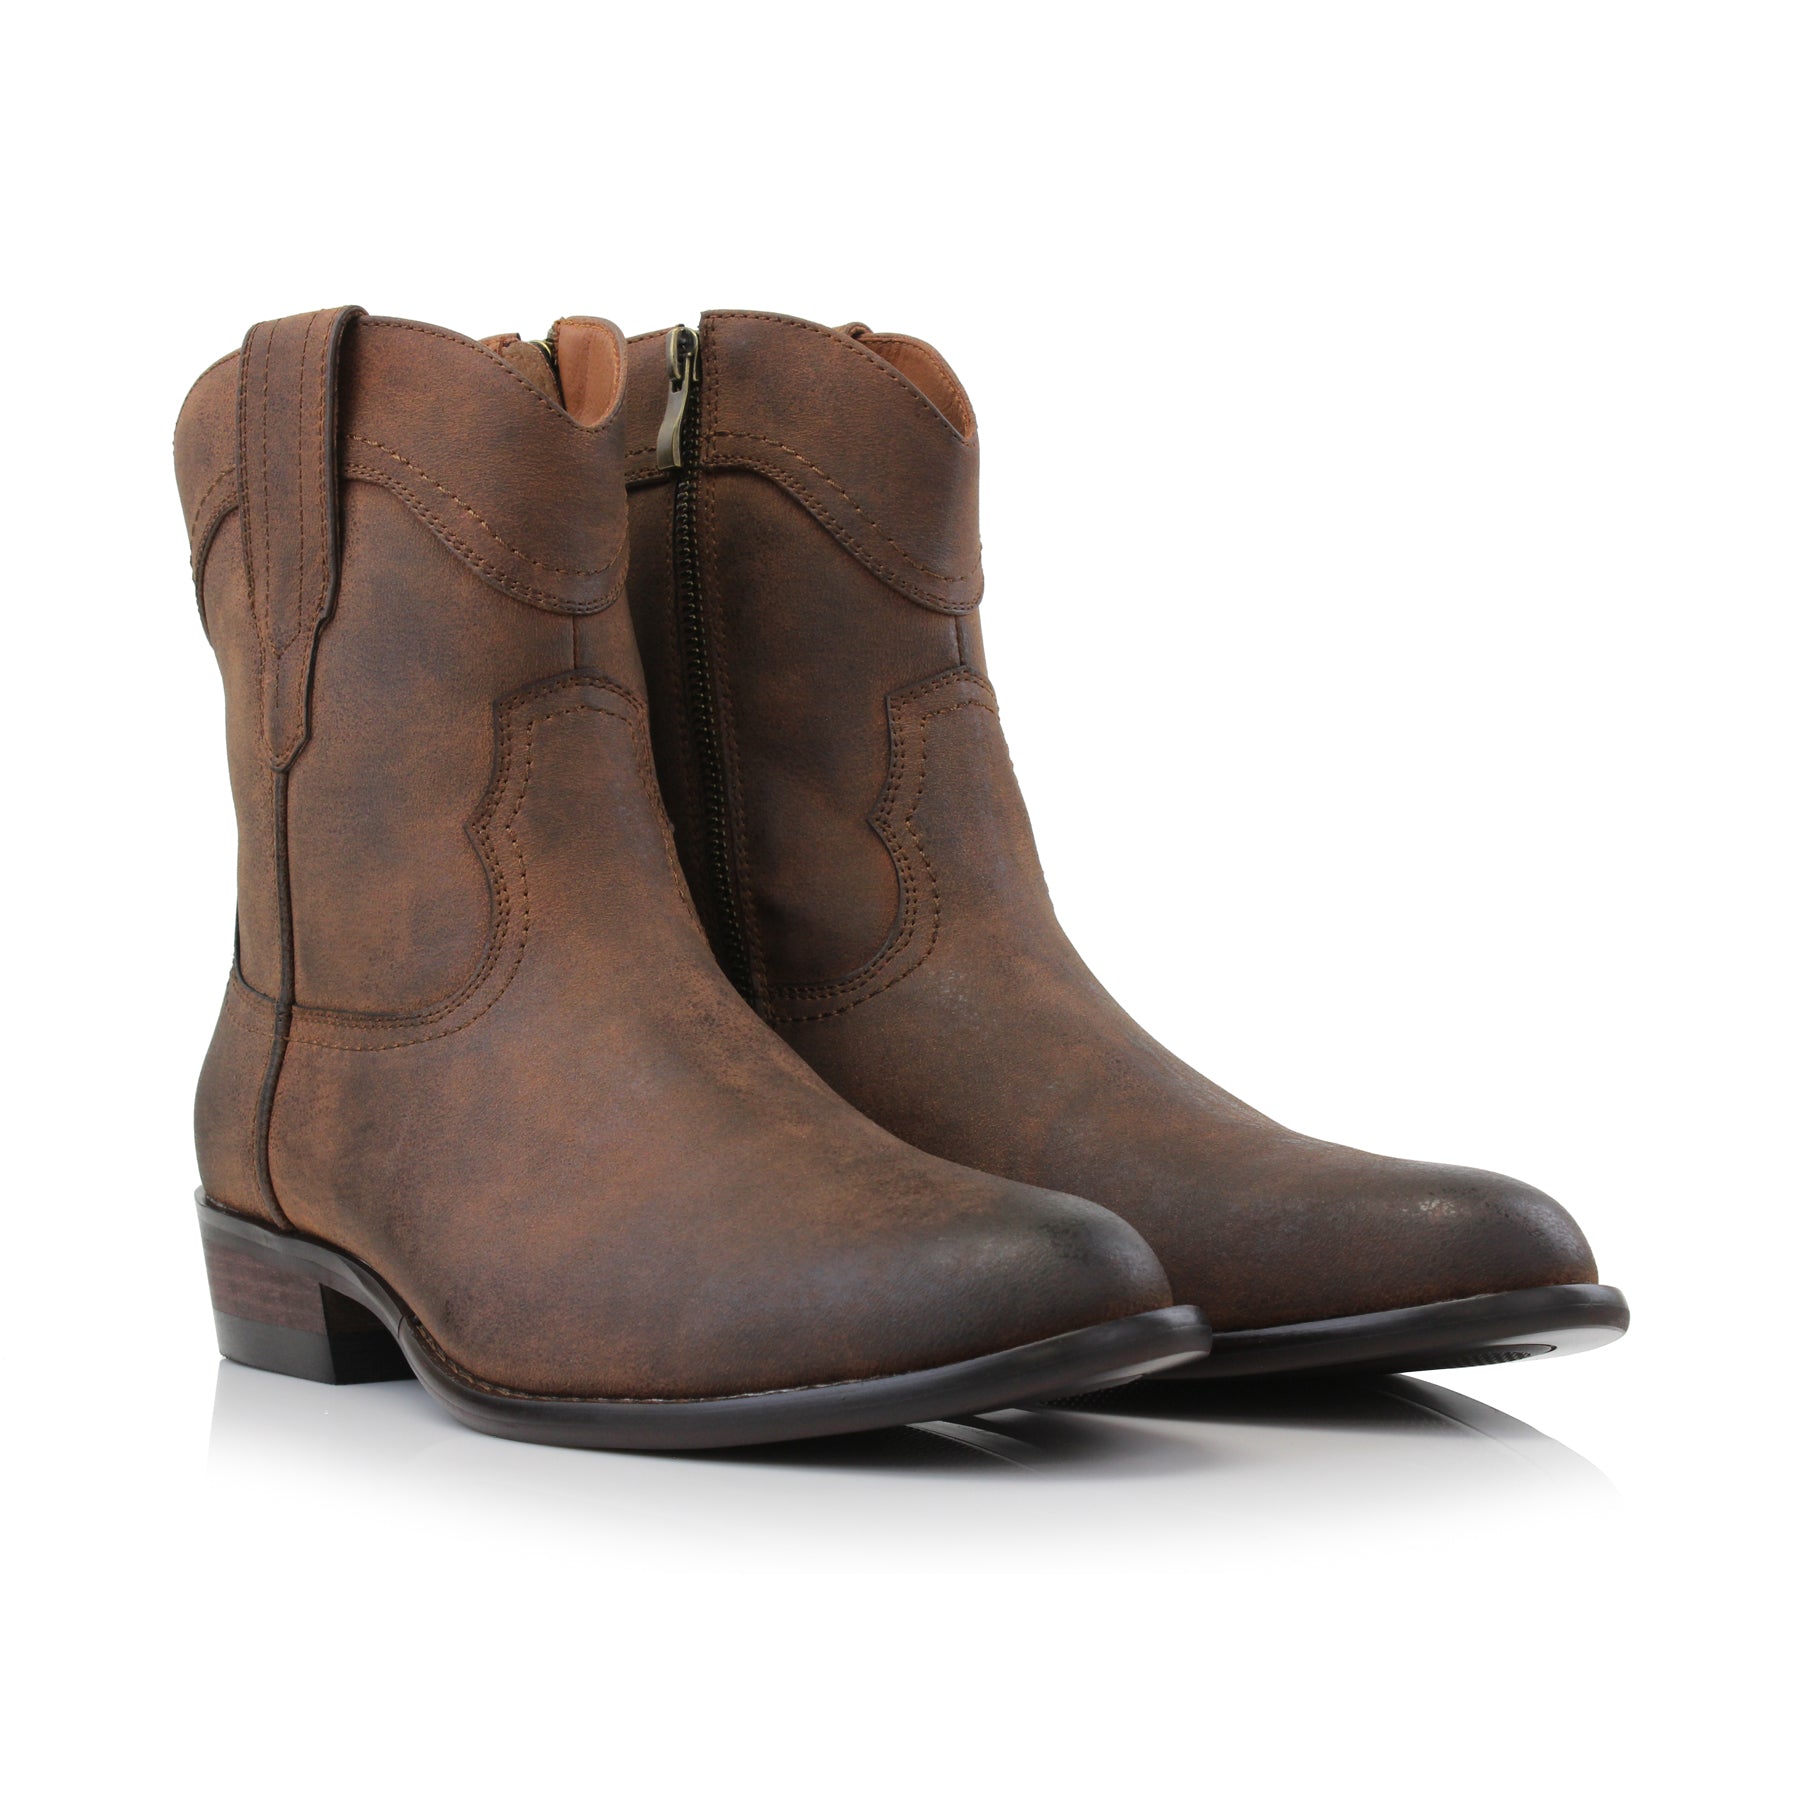 Men's Western Boots | Austin by Ferro Aldo | Conal Footwear | Paired Angle View